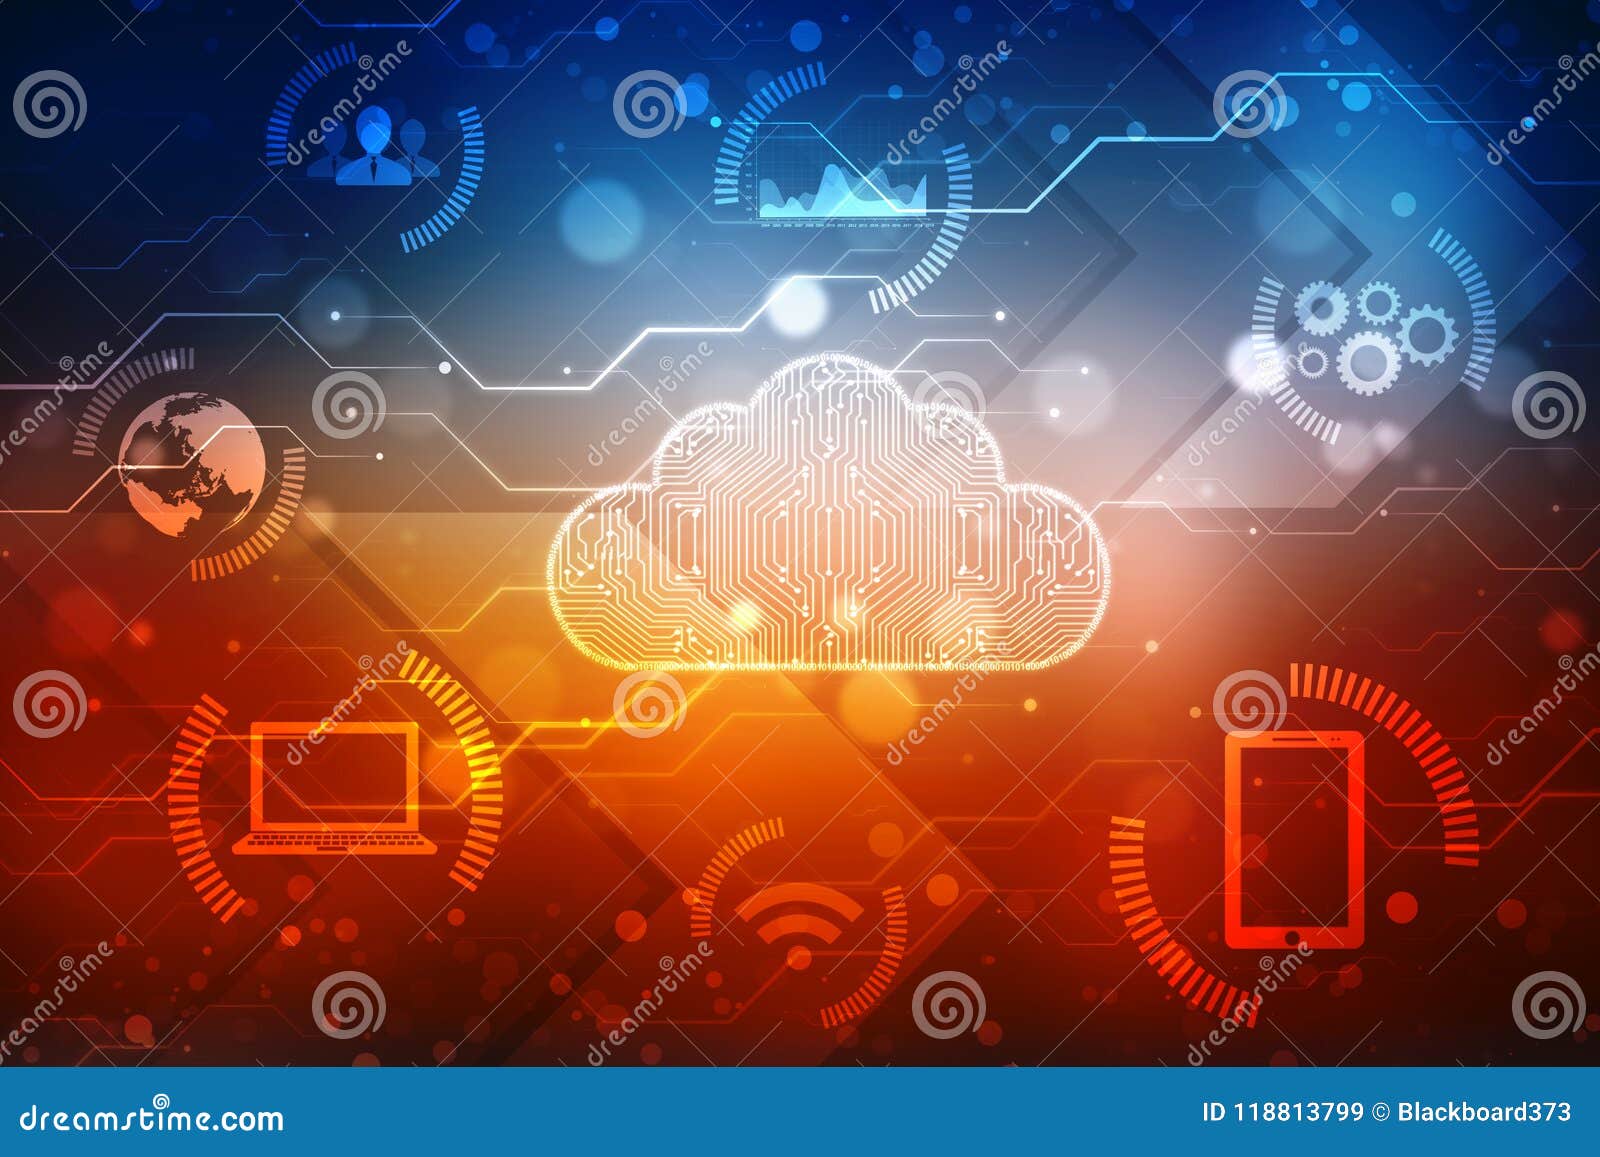 cloud computing concept background, digital abstract background